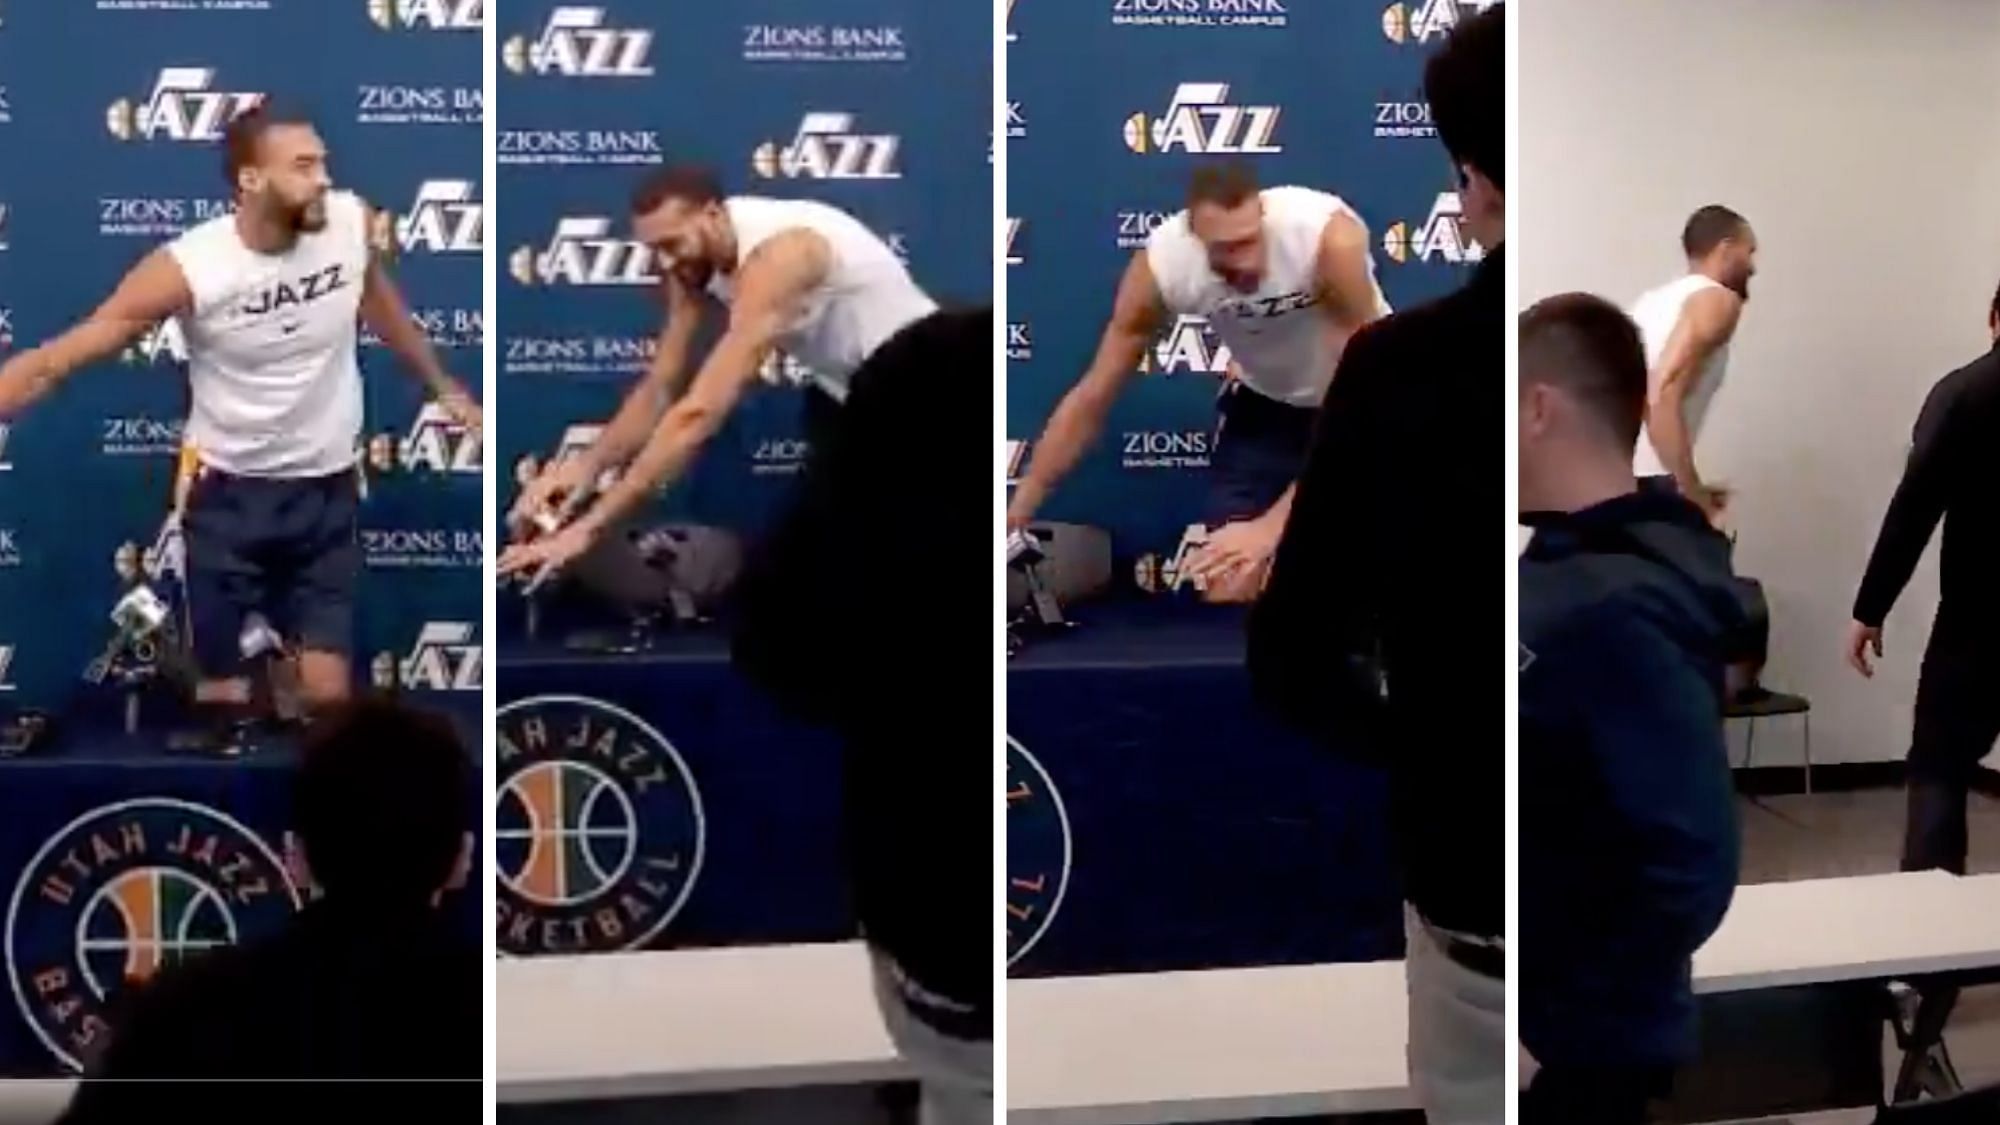 Rudy Gobert has joked about Coronavirus and touched mics after an NBA press conference.